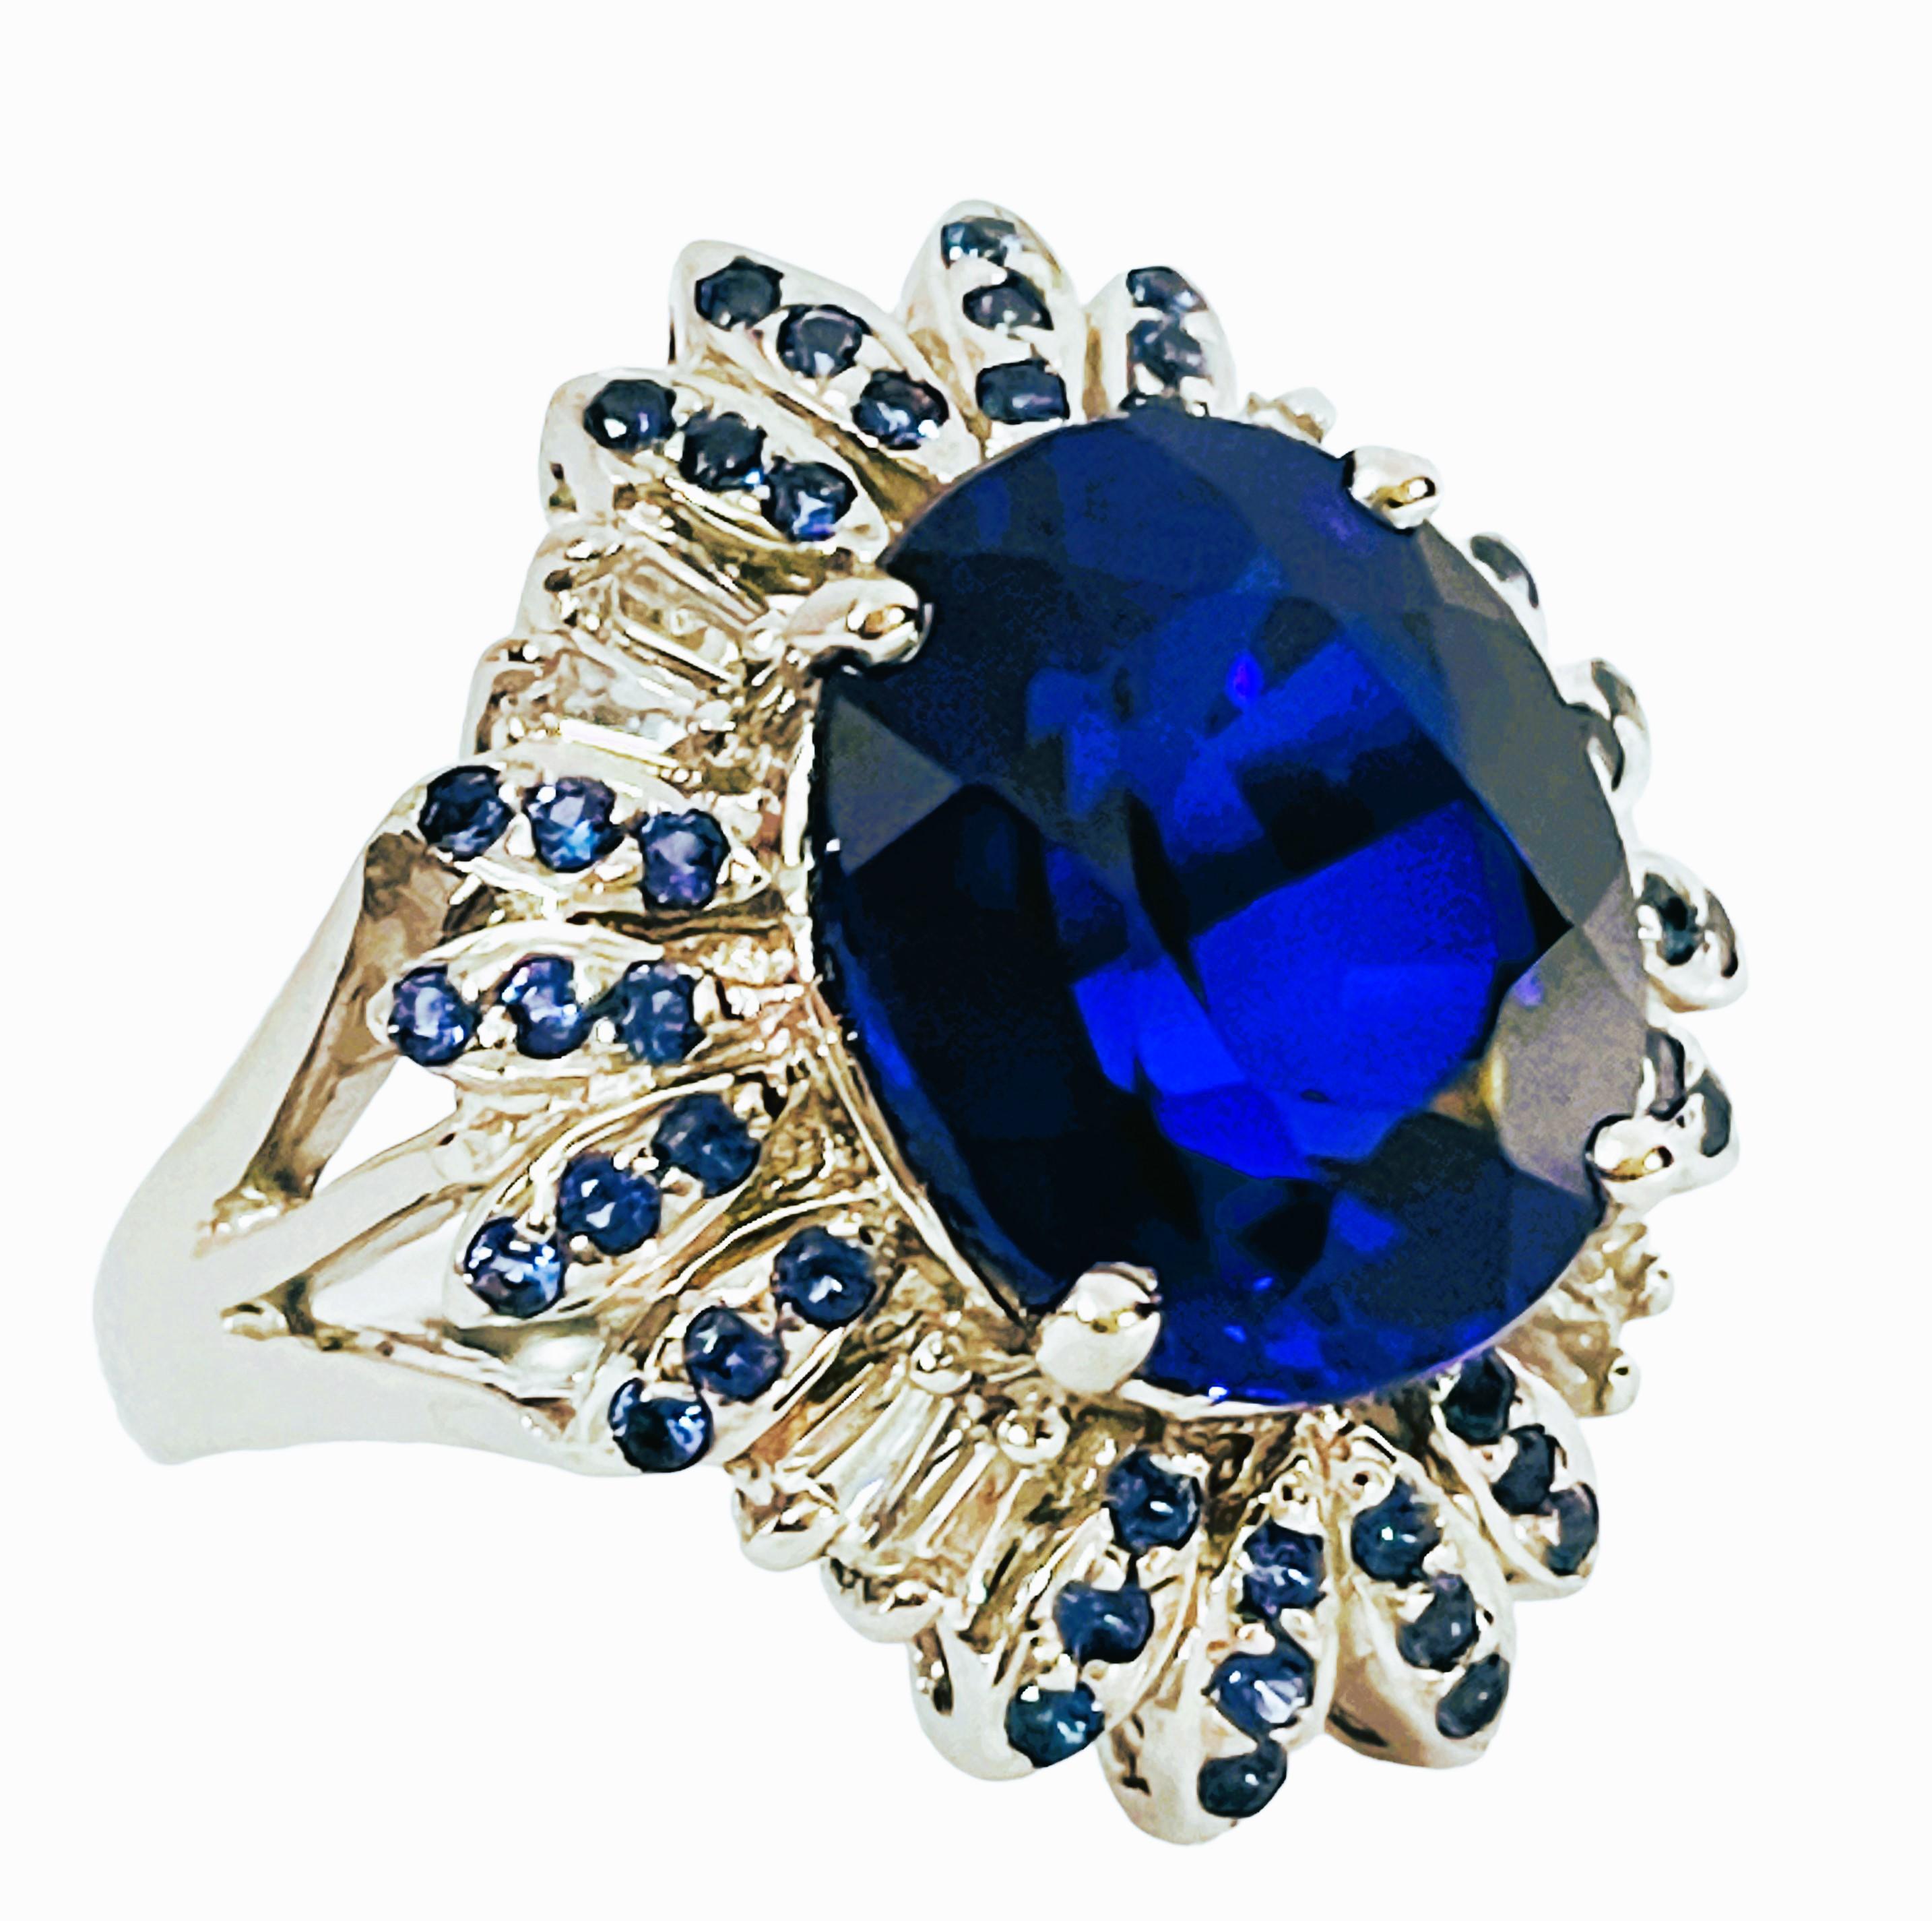 Women's New African IF 9 Carat Kashmir Blue, Royal Blue and White Sapphire Sterling Ring